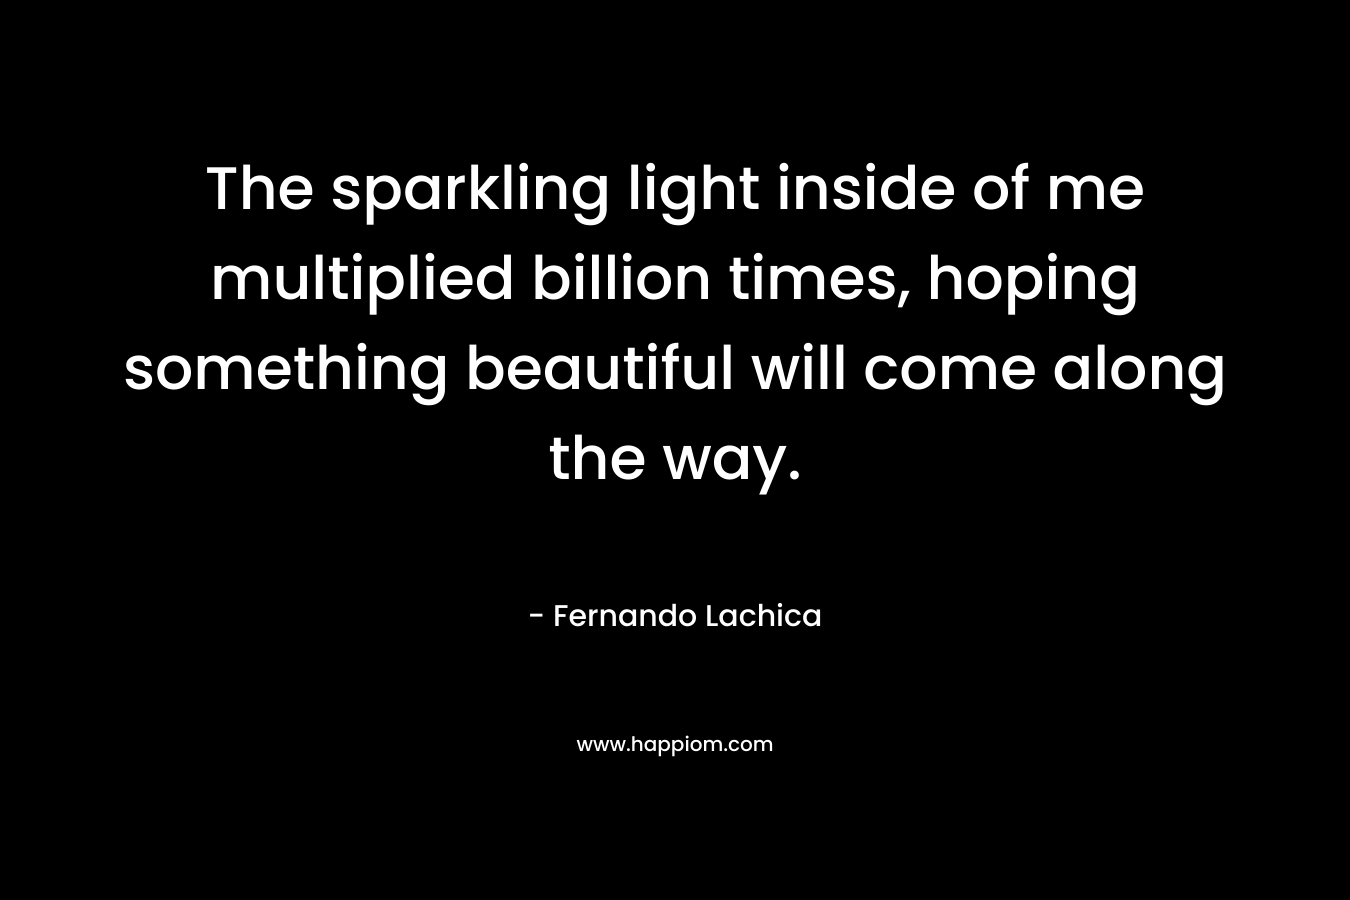 The sparkling light inside of me multiplied billion times, hoping something beautiful will come along the way. – Fernando Lachica